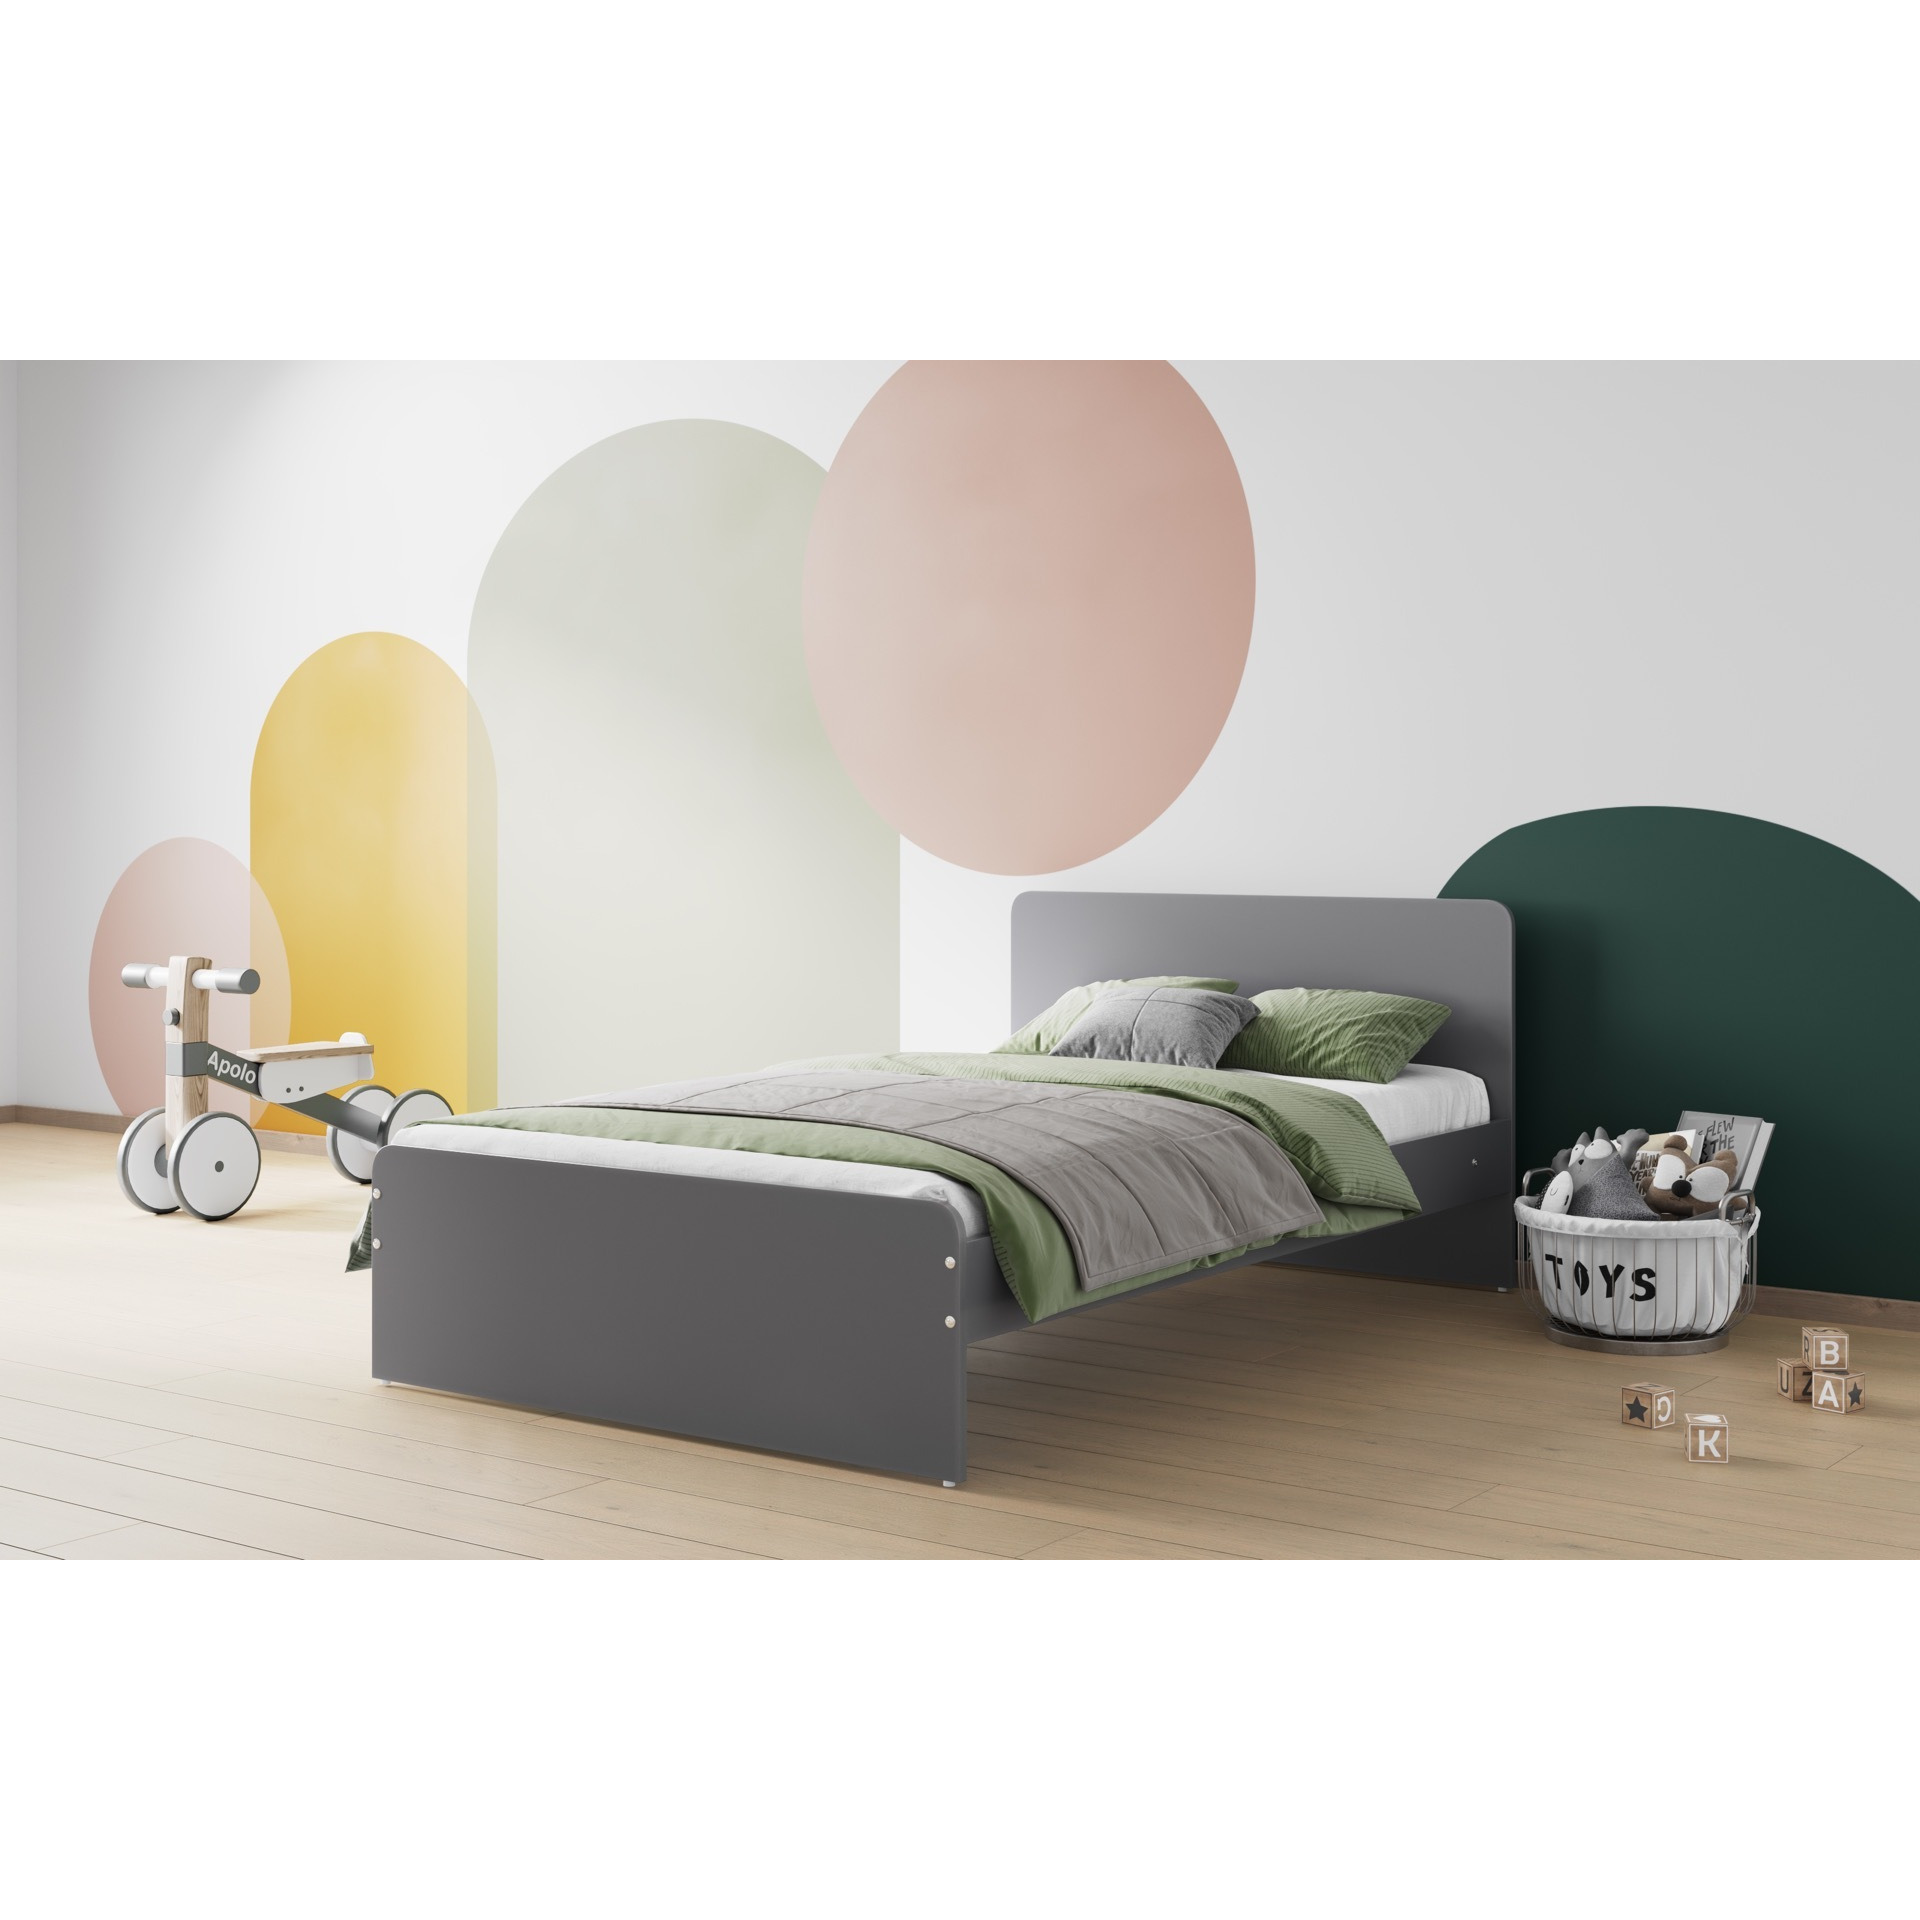 Flair Wizard Small Double Grey Bed Frame - image 1